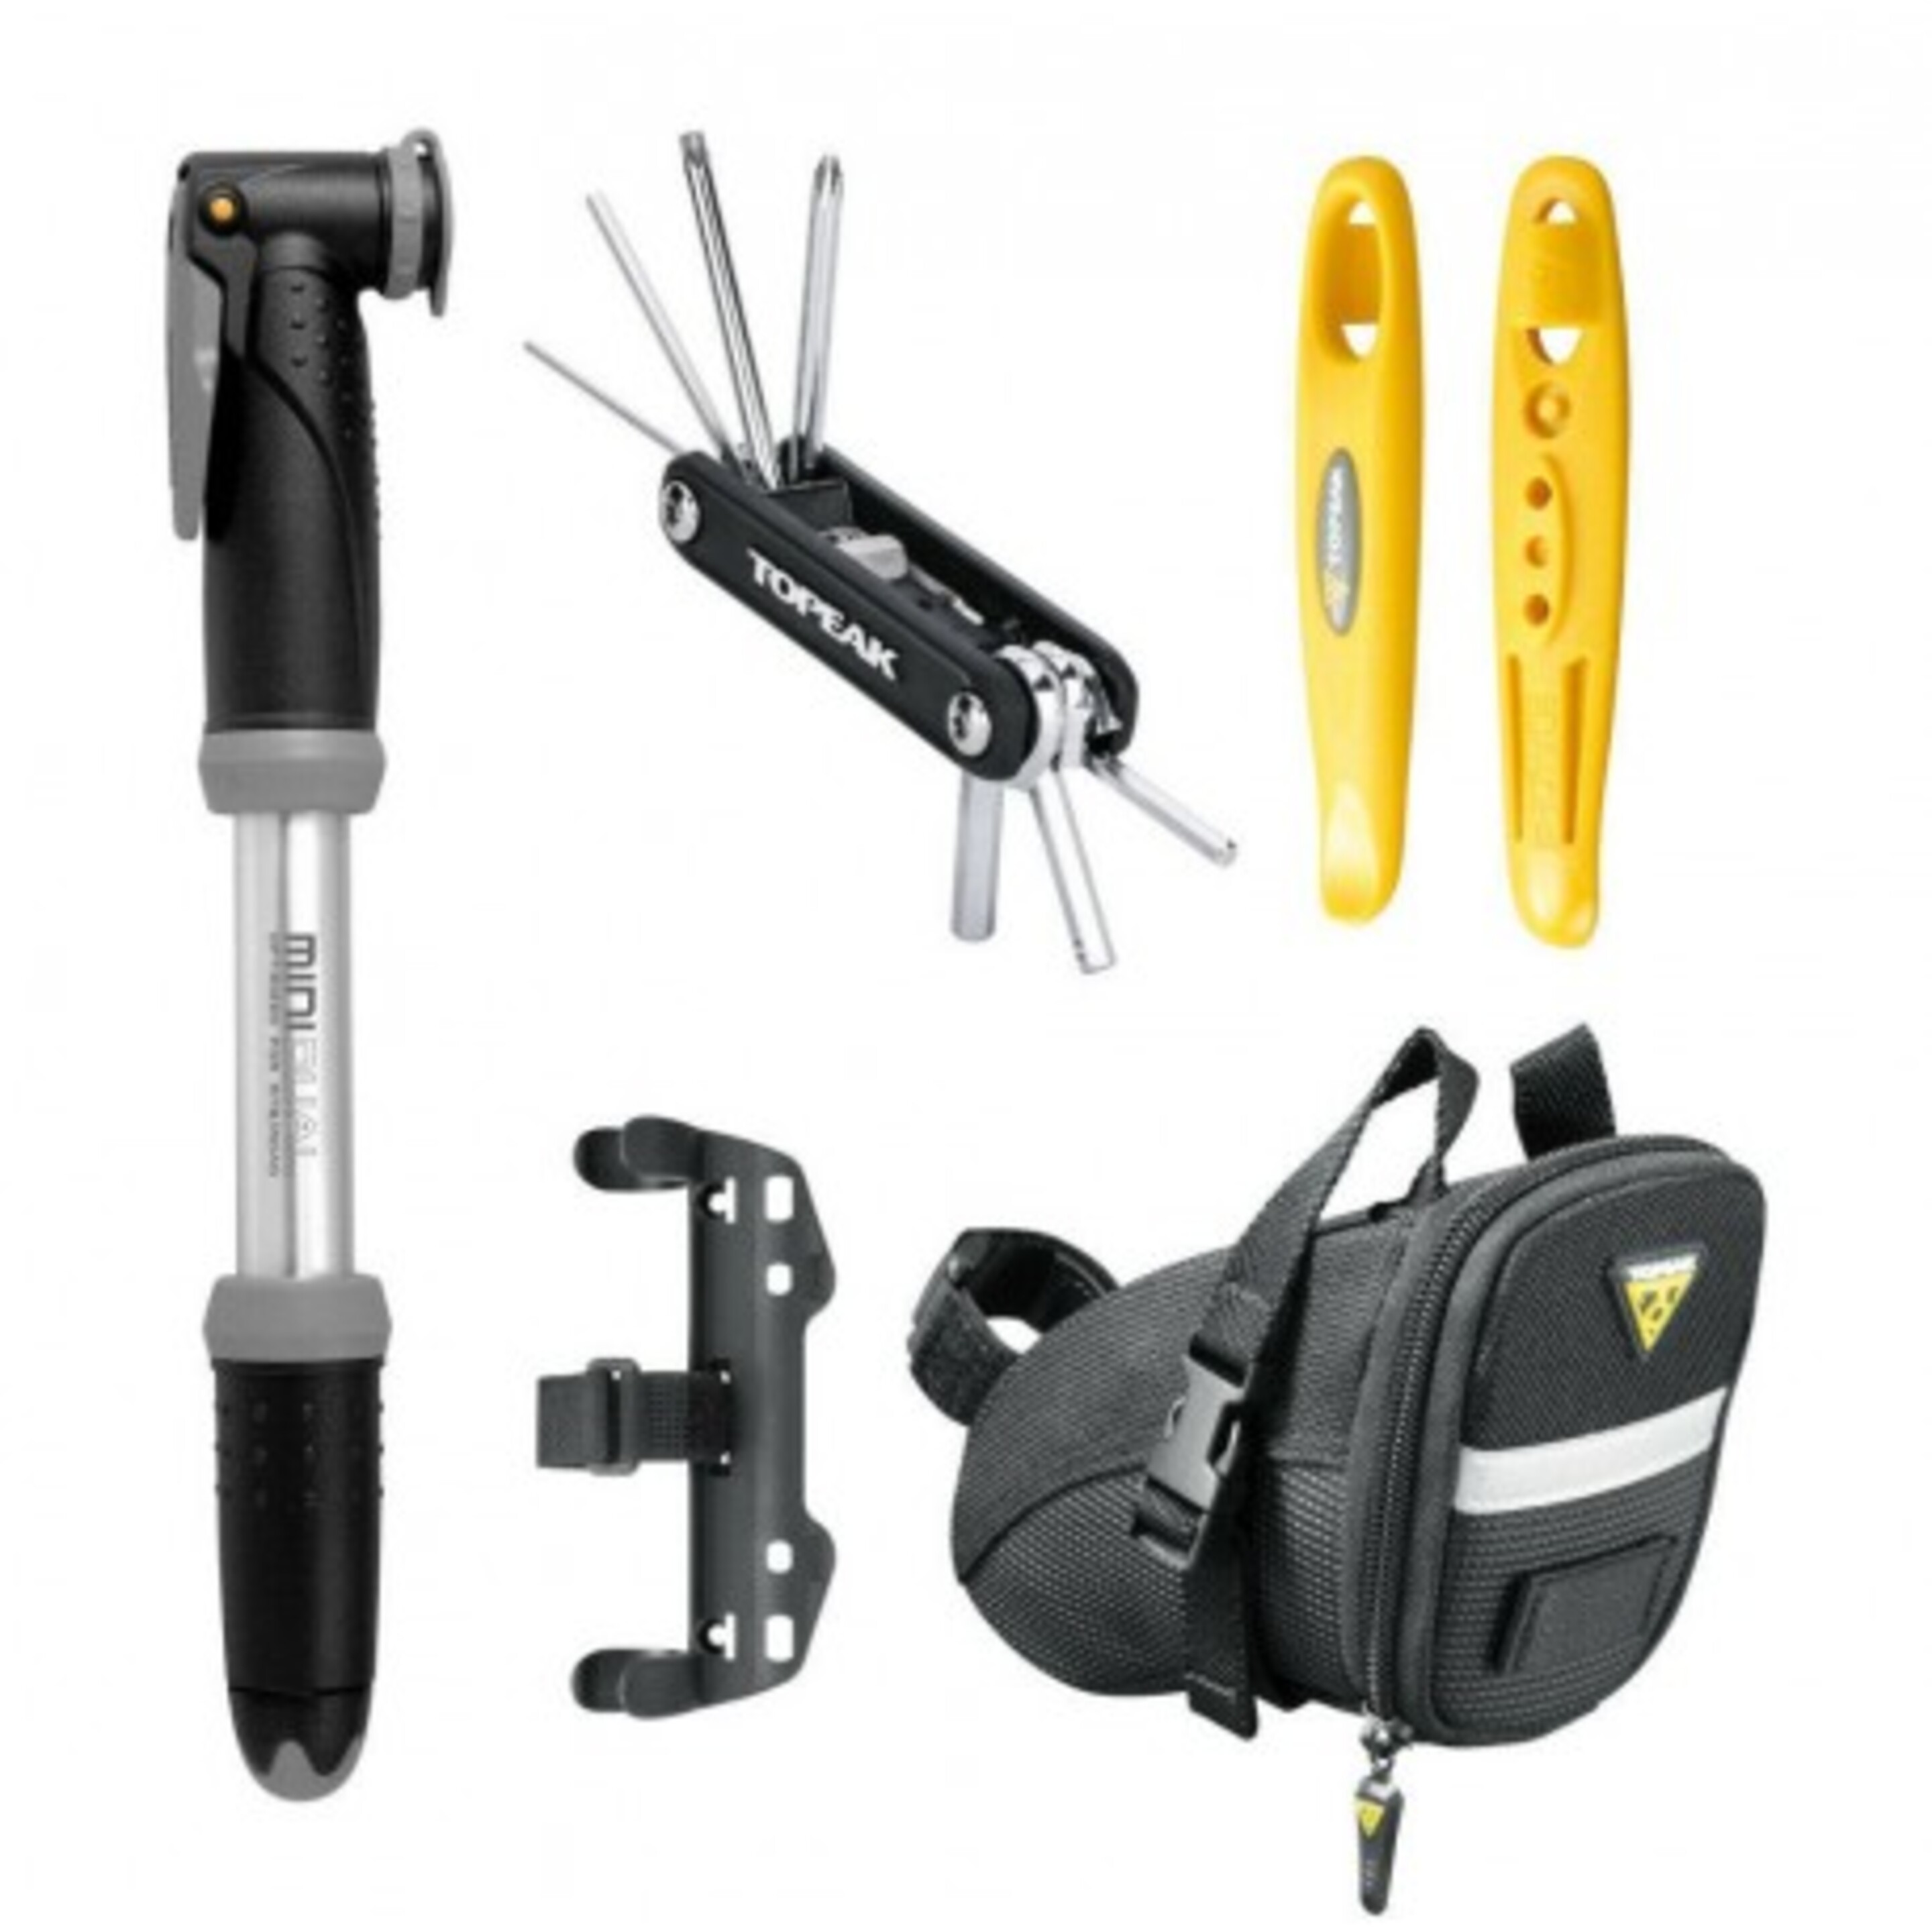 Kit De Ciclismo Deluxe Cycling Accessory Kit Topeak - Negro - Kit De Ciclismo Deluxe Cycling  MKP